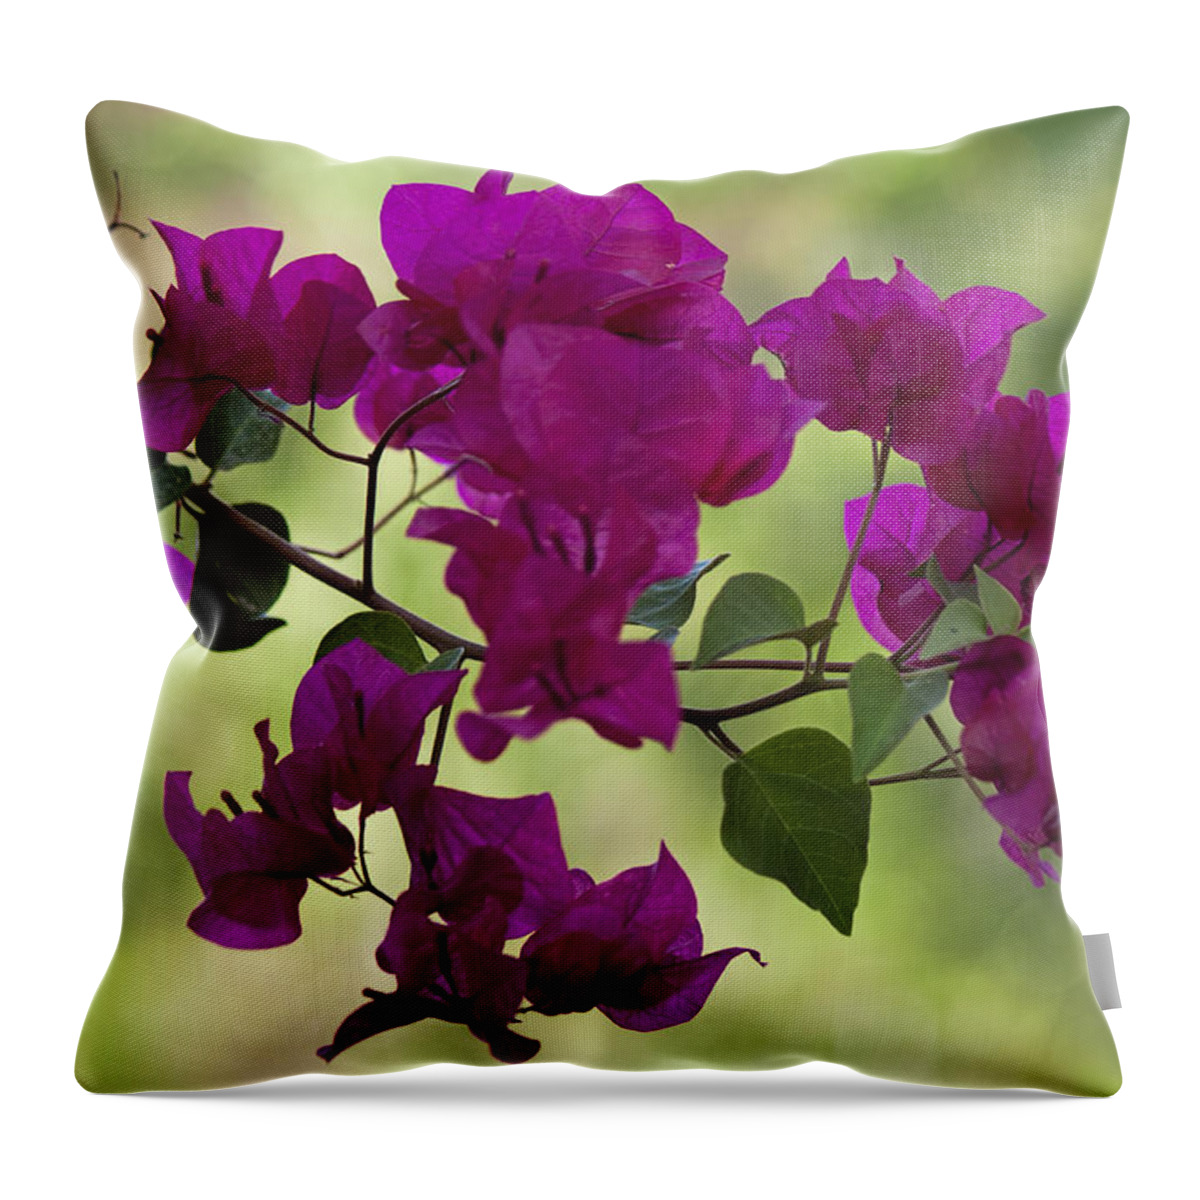 Fred Larson Throw Pillow featuring the photograph Bougainvillea by Fred Larson